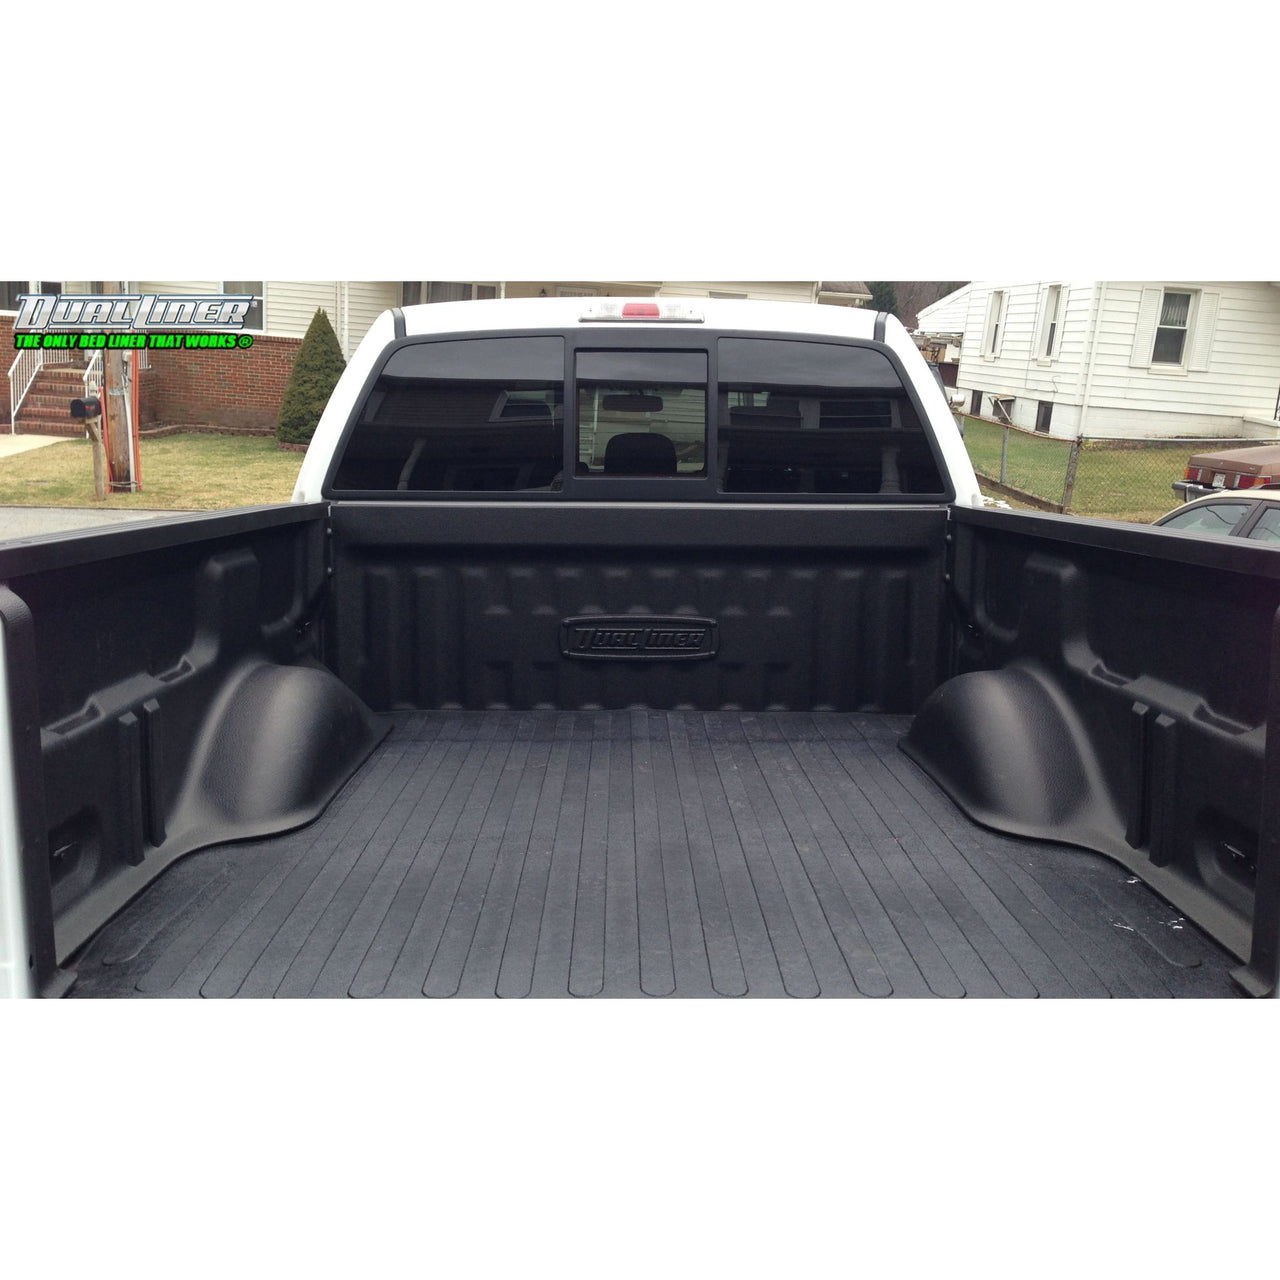 DualLiner 2021 to 2022 F-150 (WITH LED Light Bar & Power Outlet & Tailgate Work Surface) - Regular 6.5' Bed